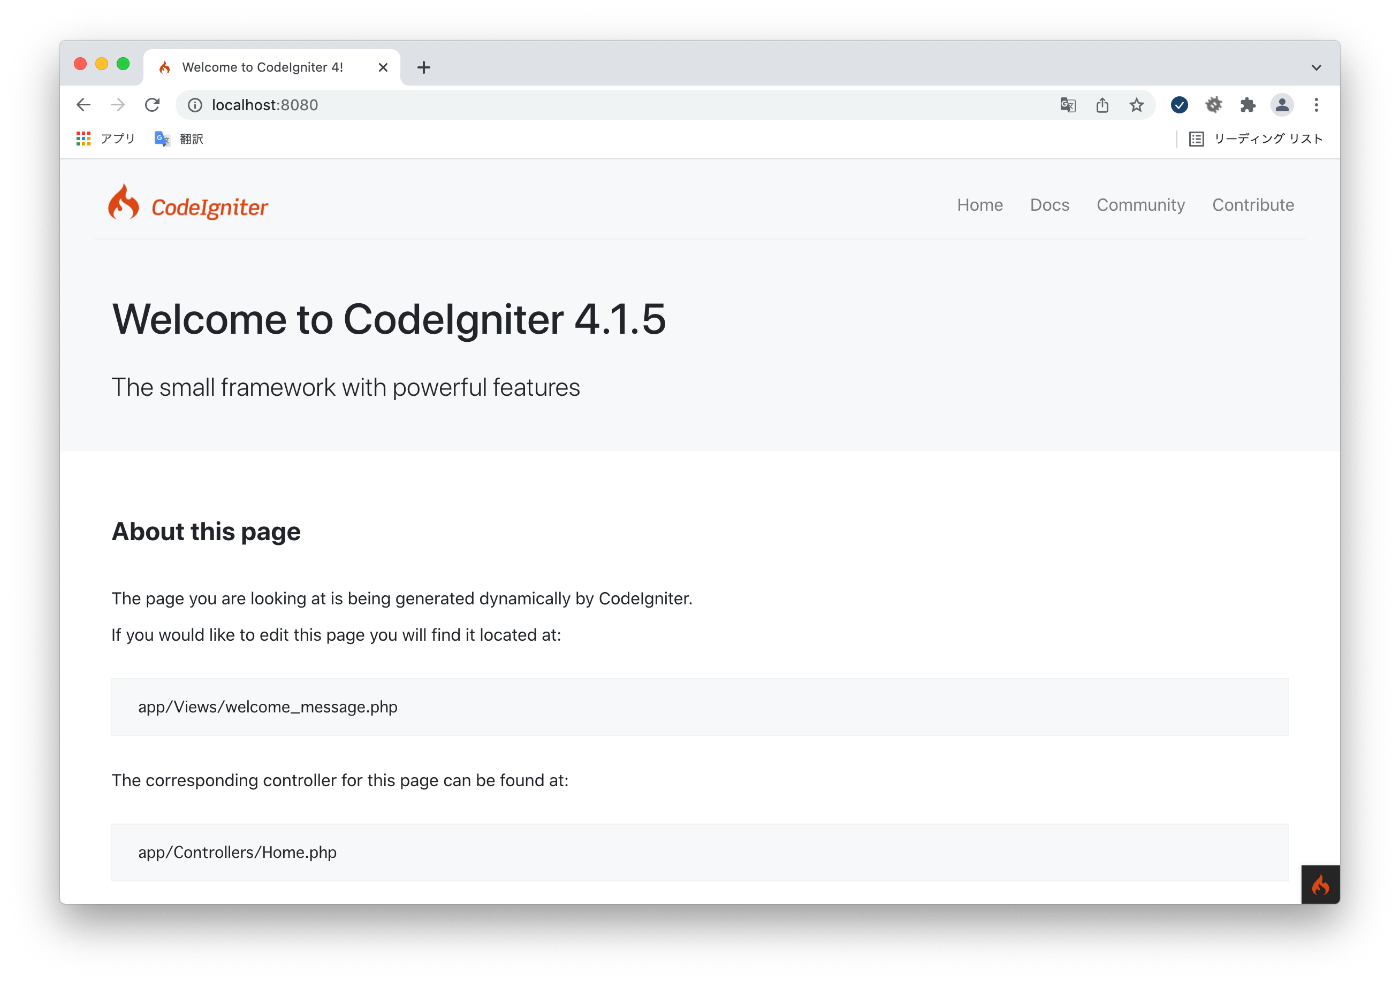 Welcome to CodeIgniter 4.1.5